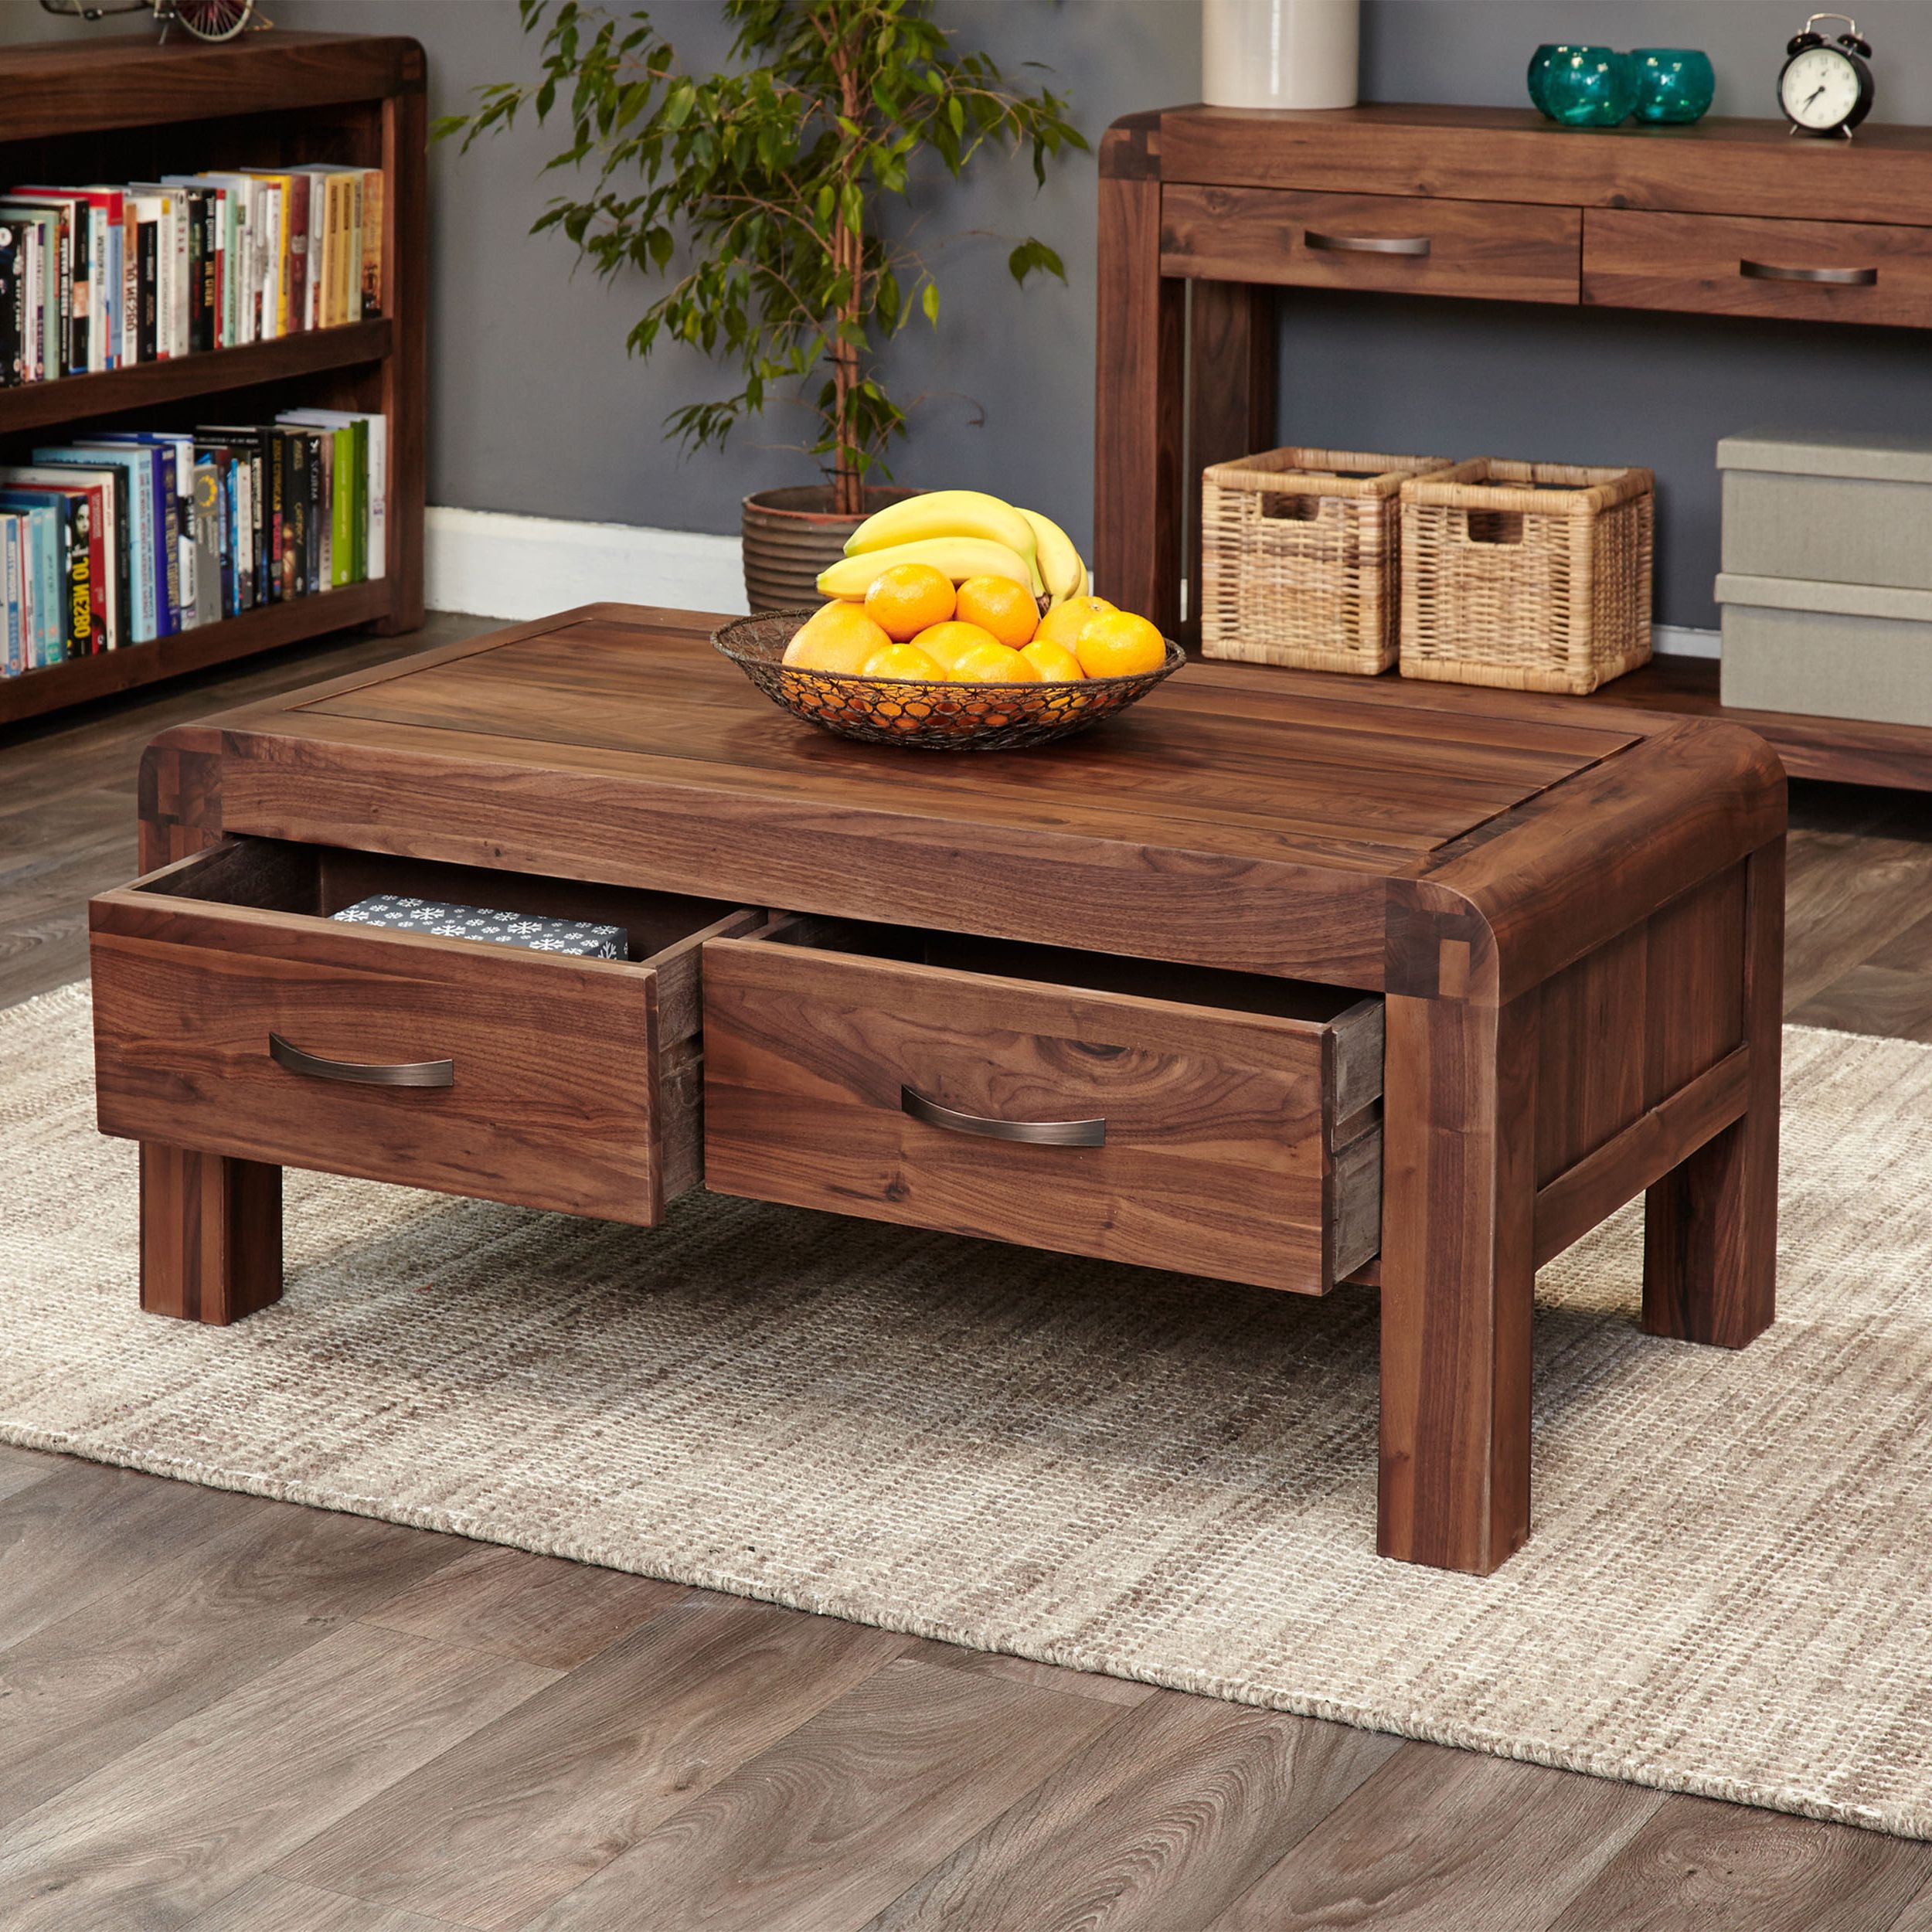 2019 Black Wood Storage Coffee Tables Within Solid Walnut Coffee Table With Storage – Shiro (View 2 of 20)